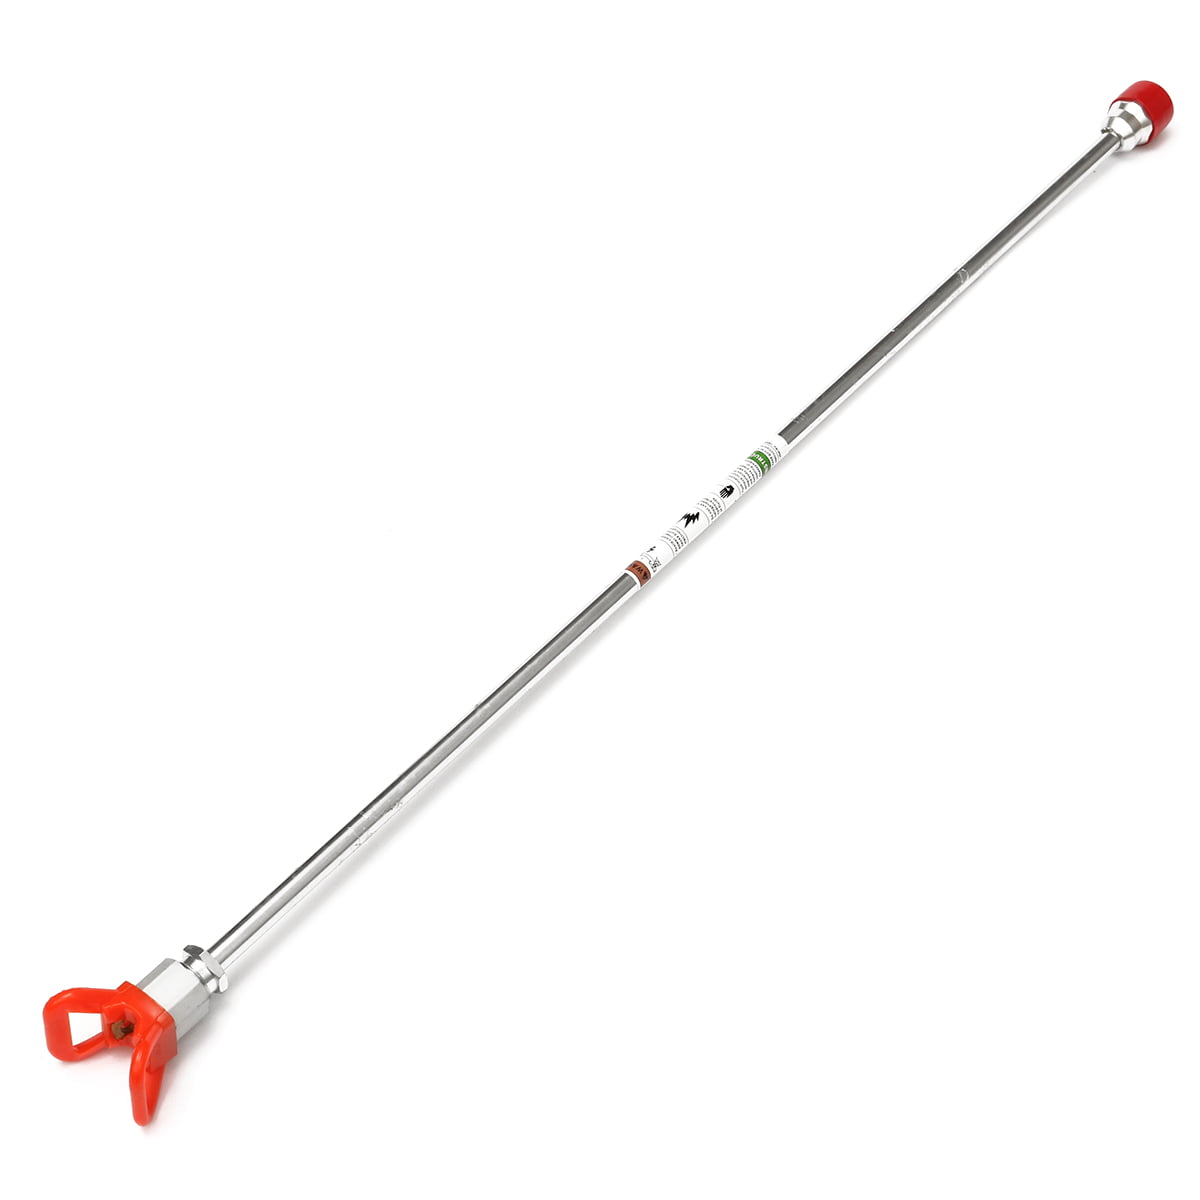 Airless Paint Sprayer Gun Pole Extension 12" Works with Most Brands 